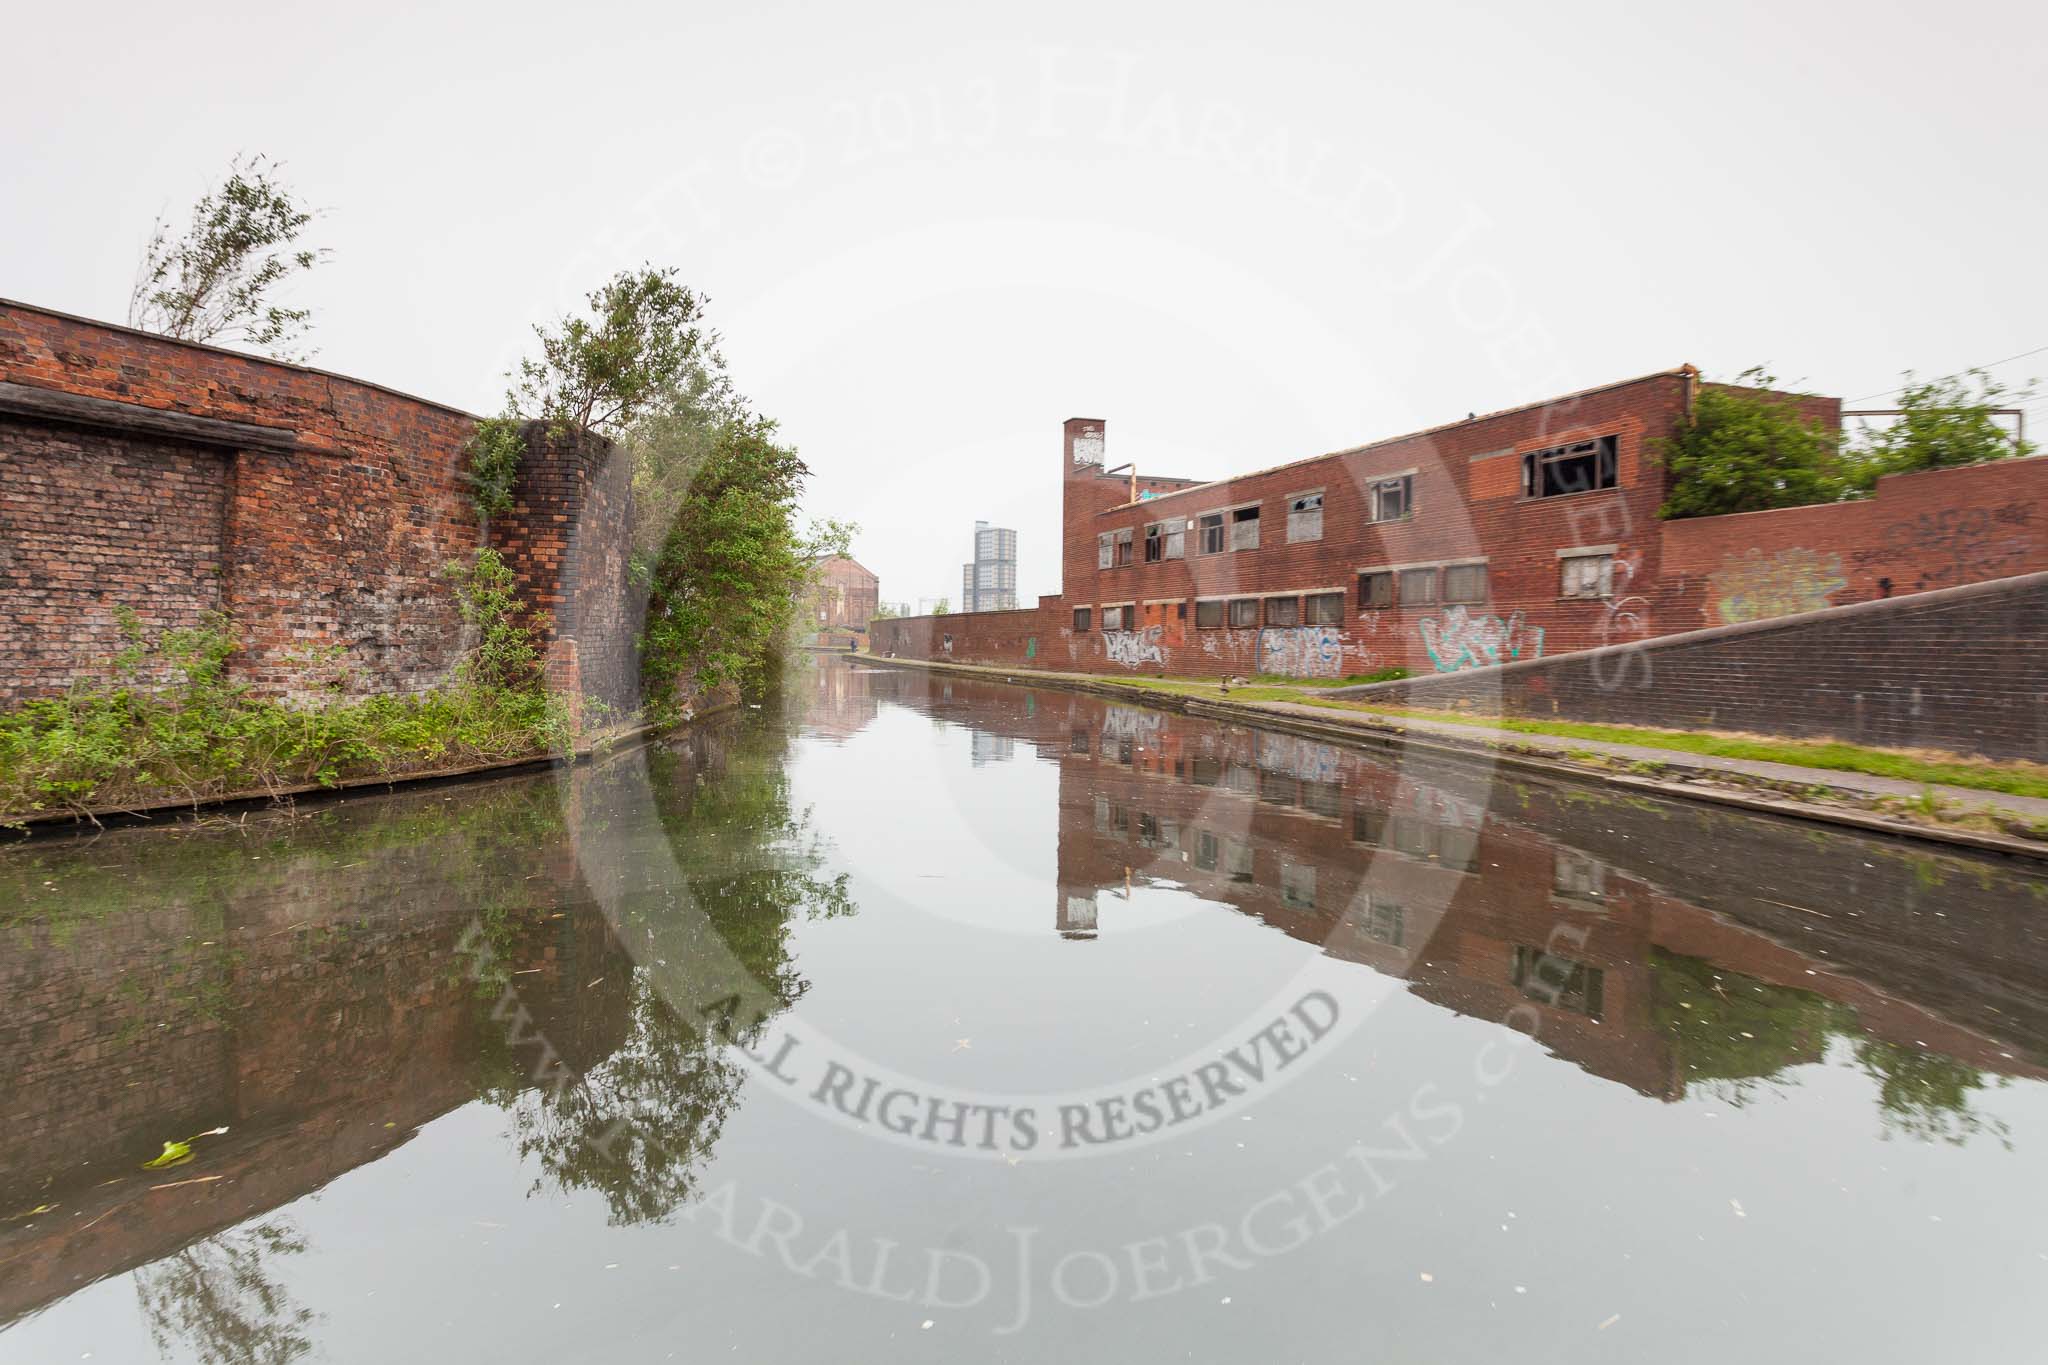 BCN 24h Marathon Challenge 2015: Old industry in a bad state on the BCN Main Line at Horseley Fields Junction.
Birmingham Canal Navigations,



on 24 May 2015 at 08:18, image #170